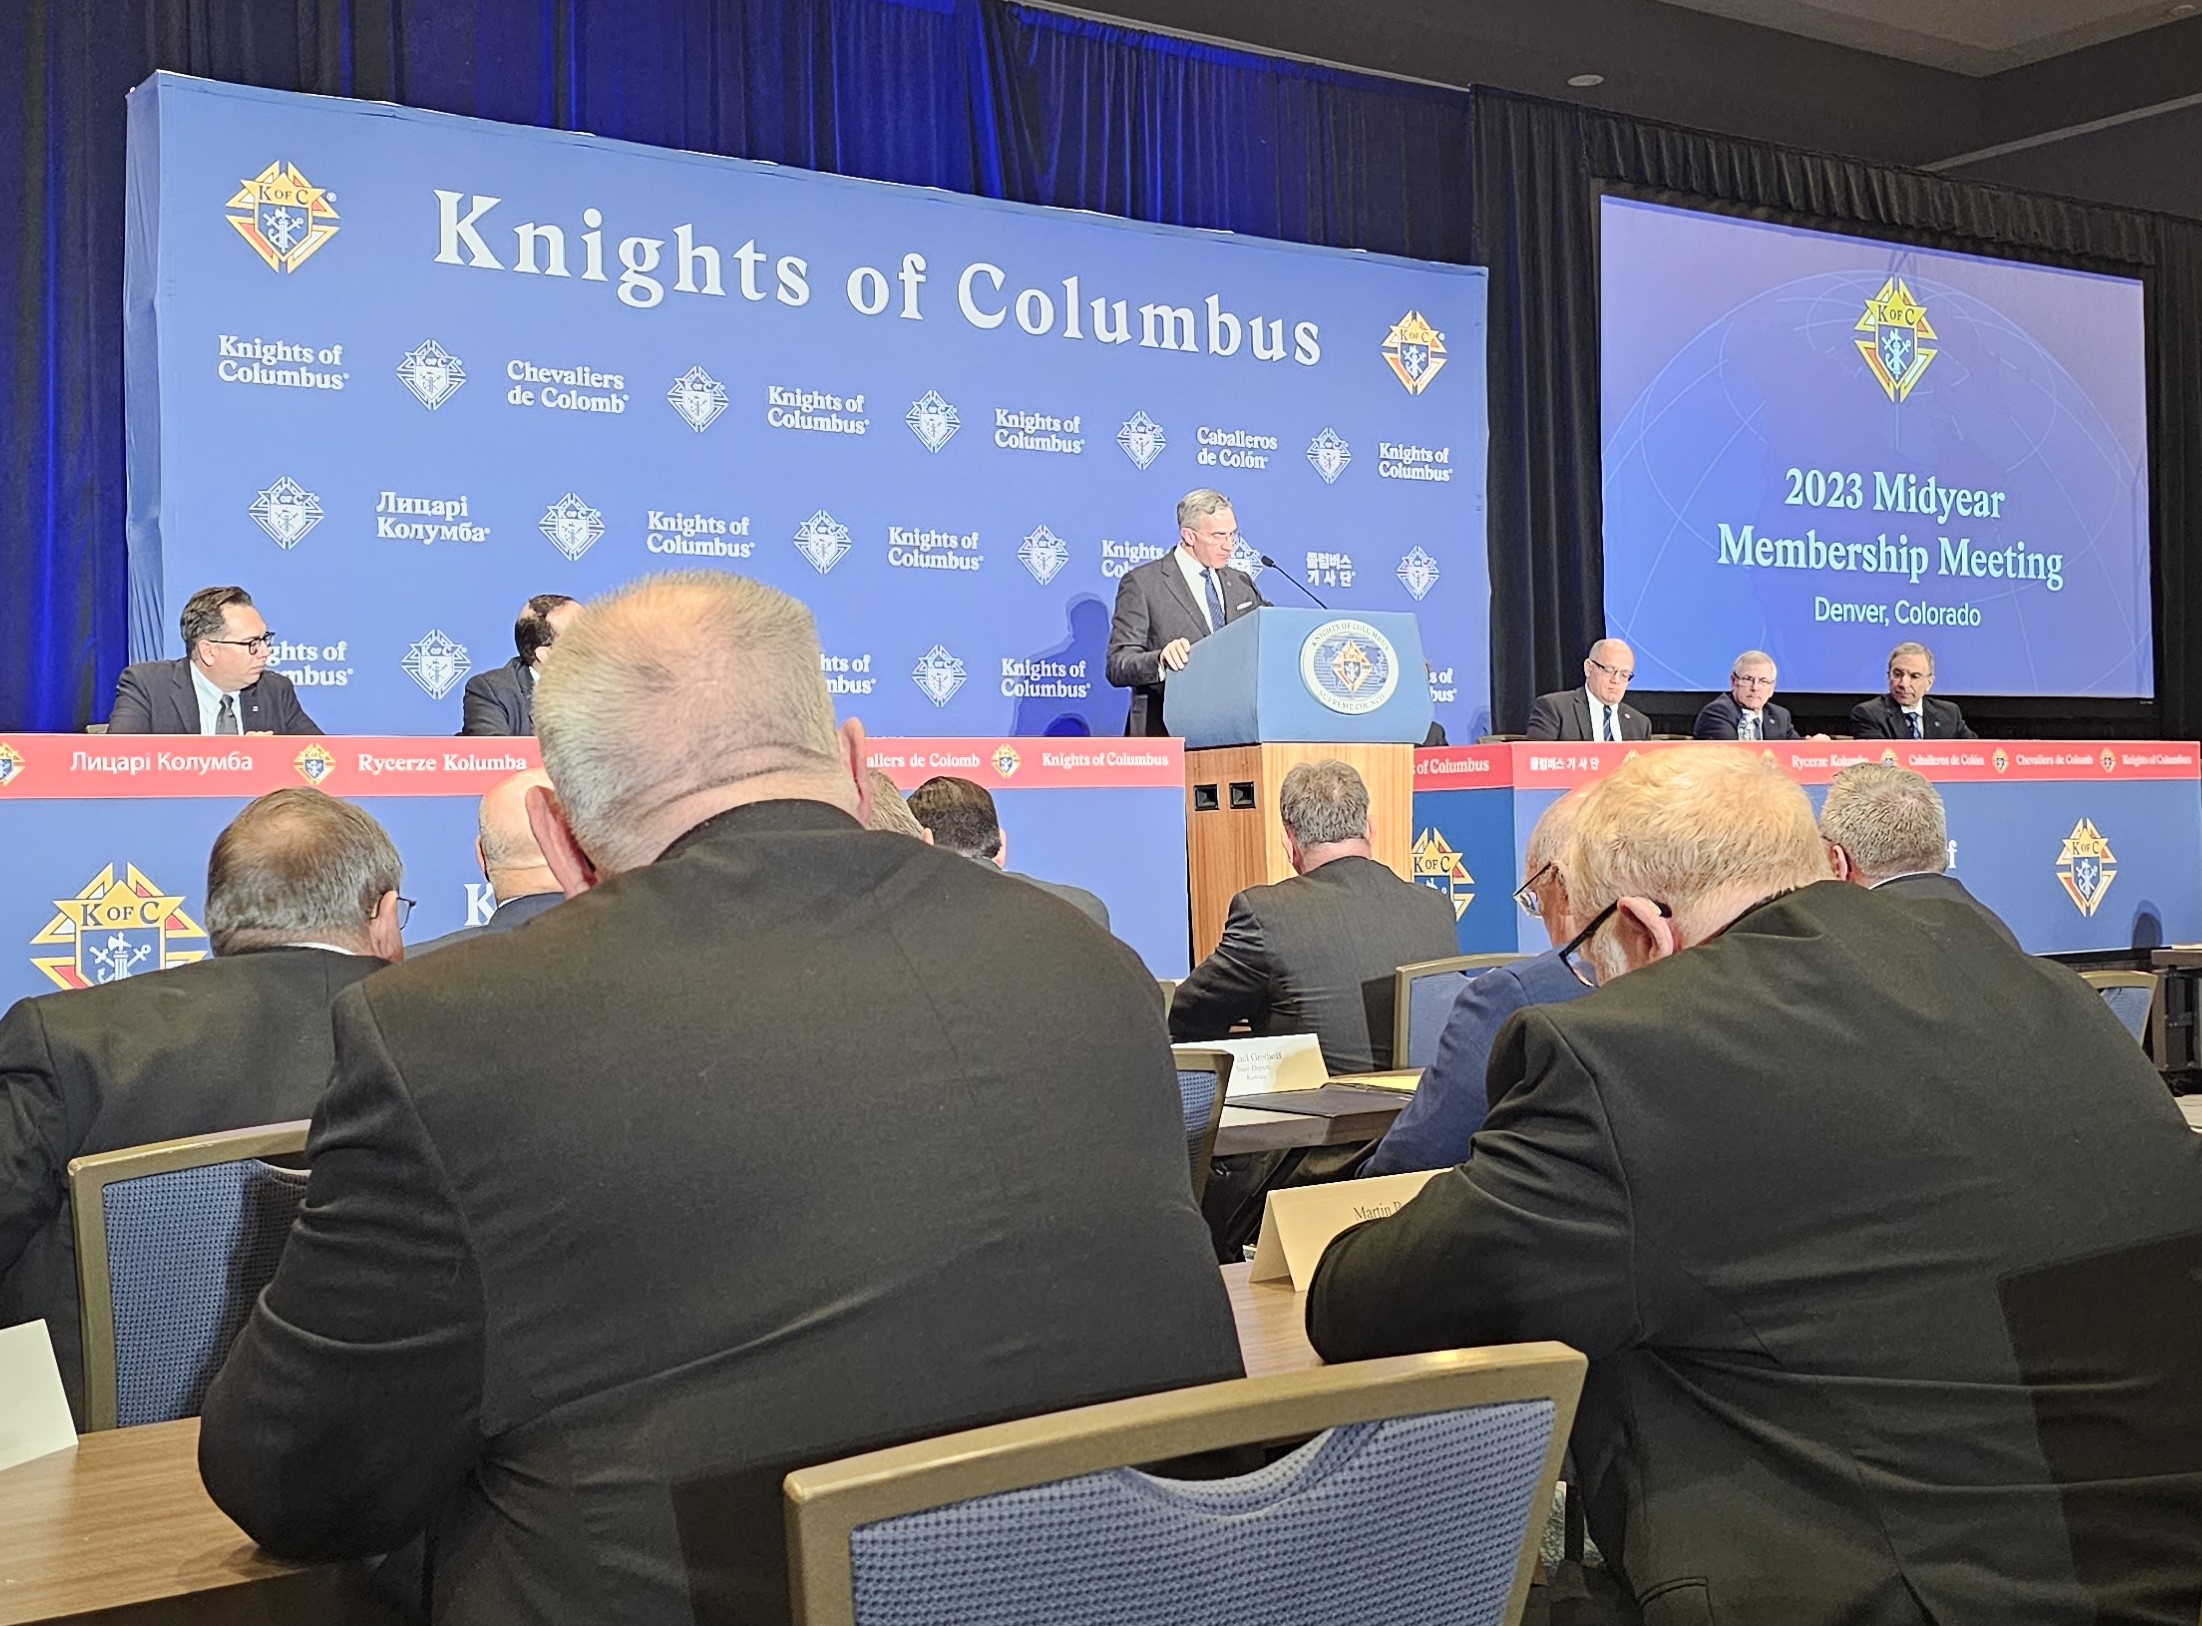 Supreme Knight Patrick Kelly addresses the state deputies who have gathered in Denver Colorado.